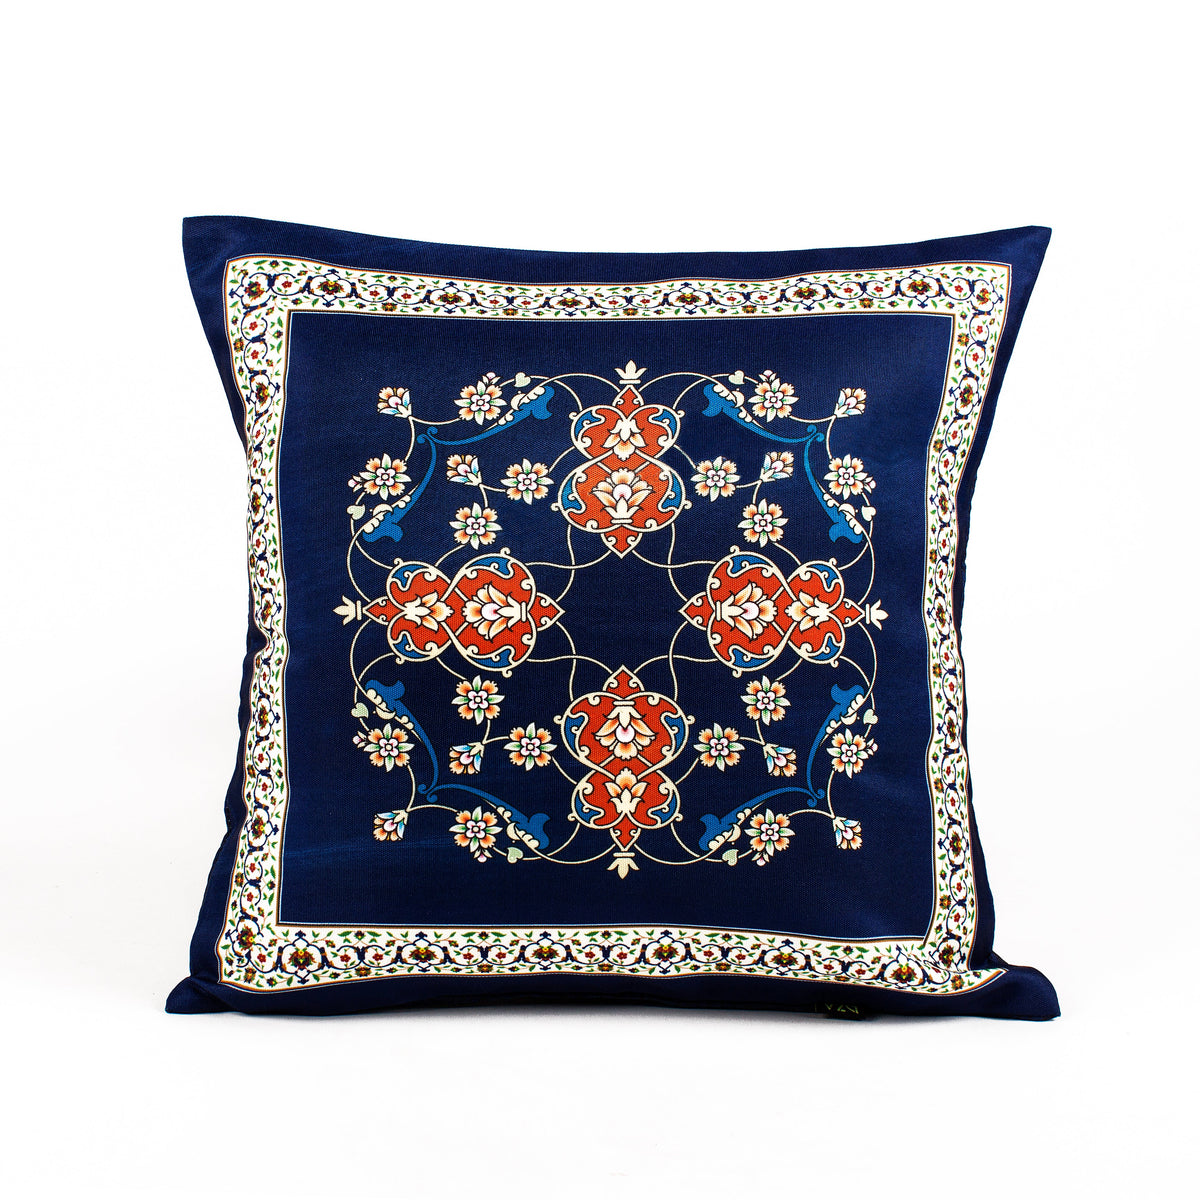 Cushion Cover-Ethnic Collection-25-Set of 2